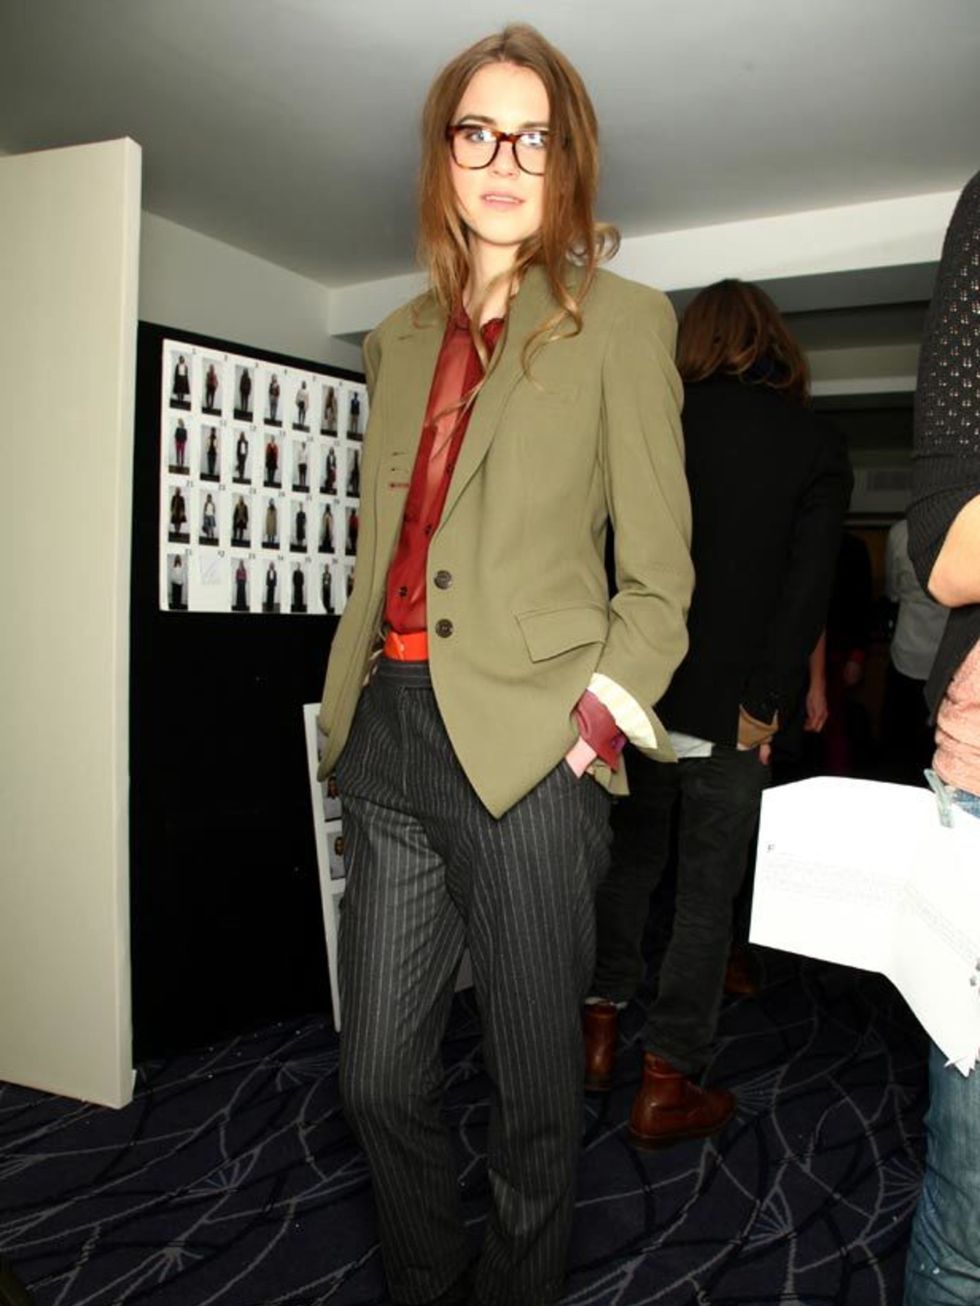 <p><strong>The Androgynous Suit</strong><strong> </strong></p><p><strong>The look:</strong> This Girl/Boy trend is big news thanks to shows like <a href="http://www.elleuk.com/catwalk/collections/chanel/autumn-winter-2011">Chanel</a>, <a href="http://www.